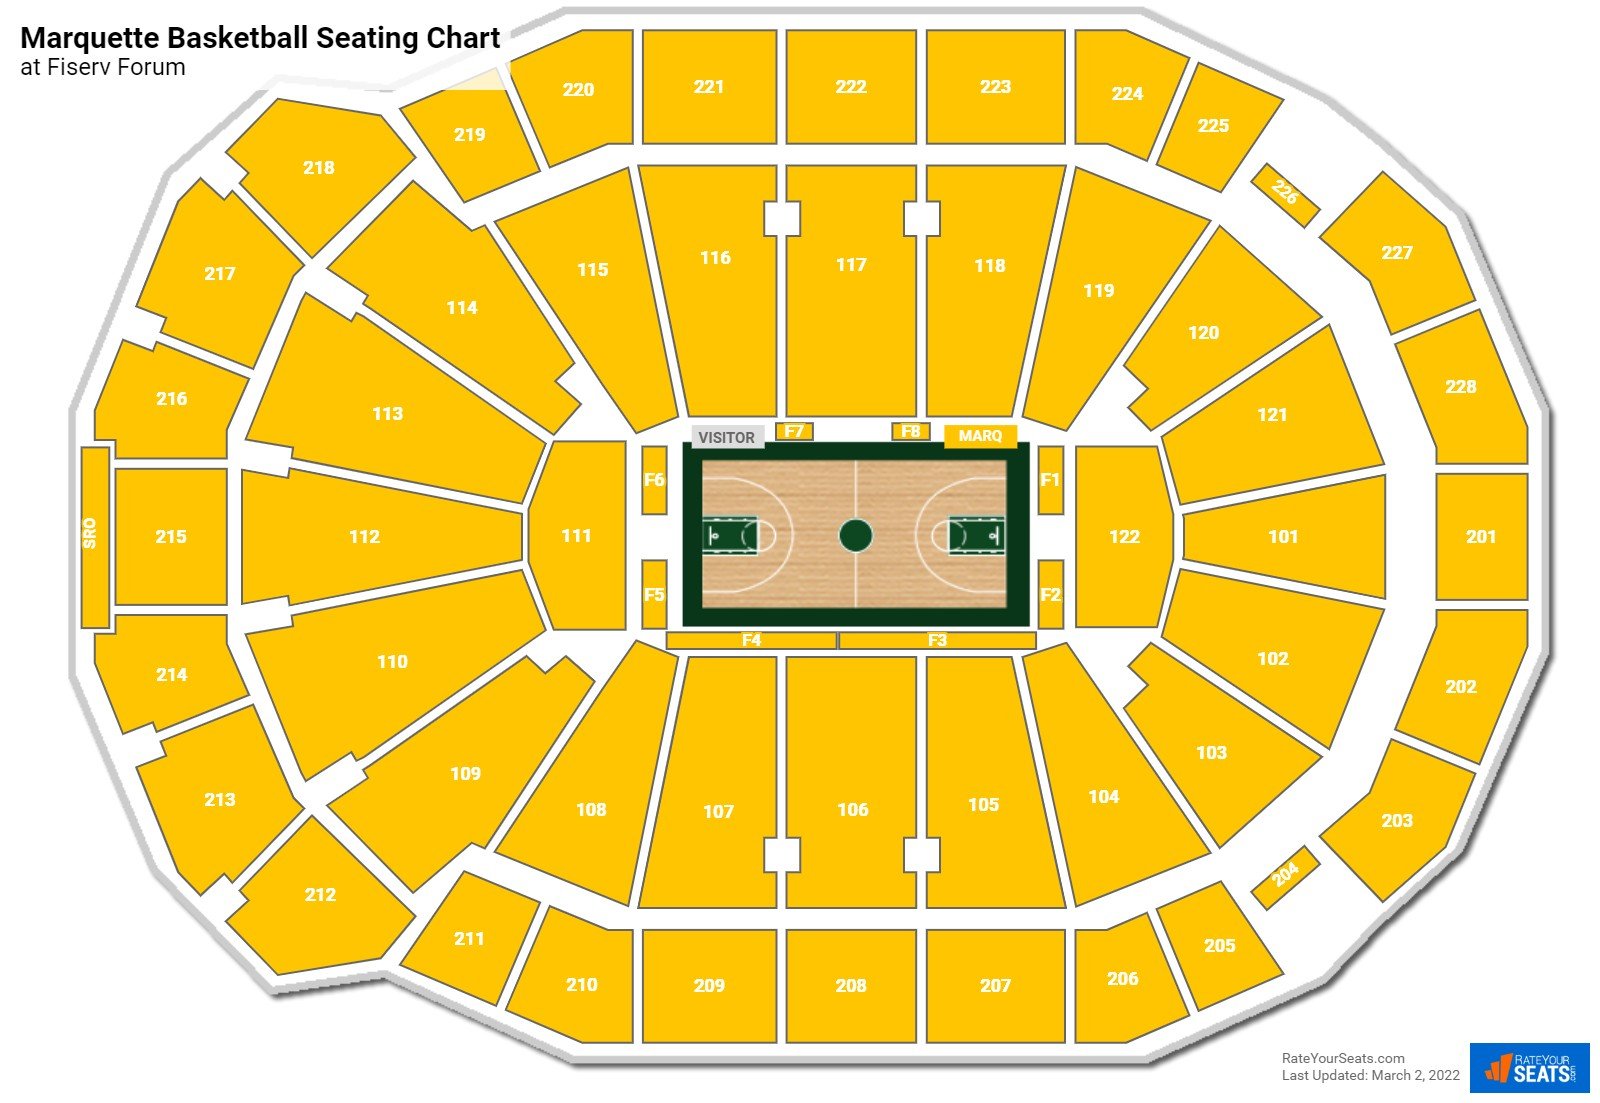 Marquette Golden Eagles Seating Chart at Fiserv Forum